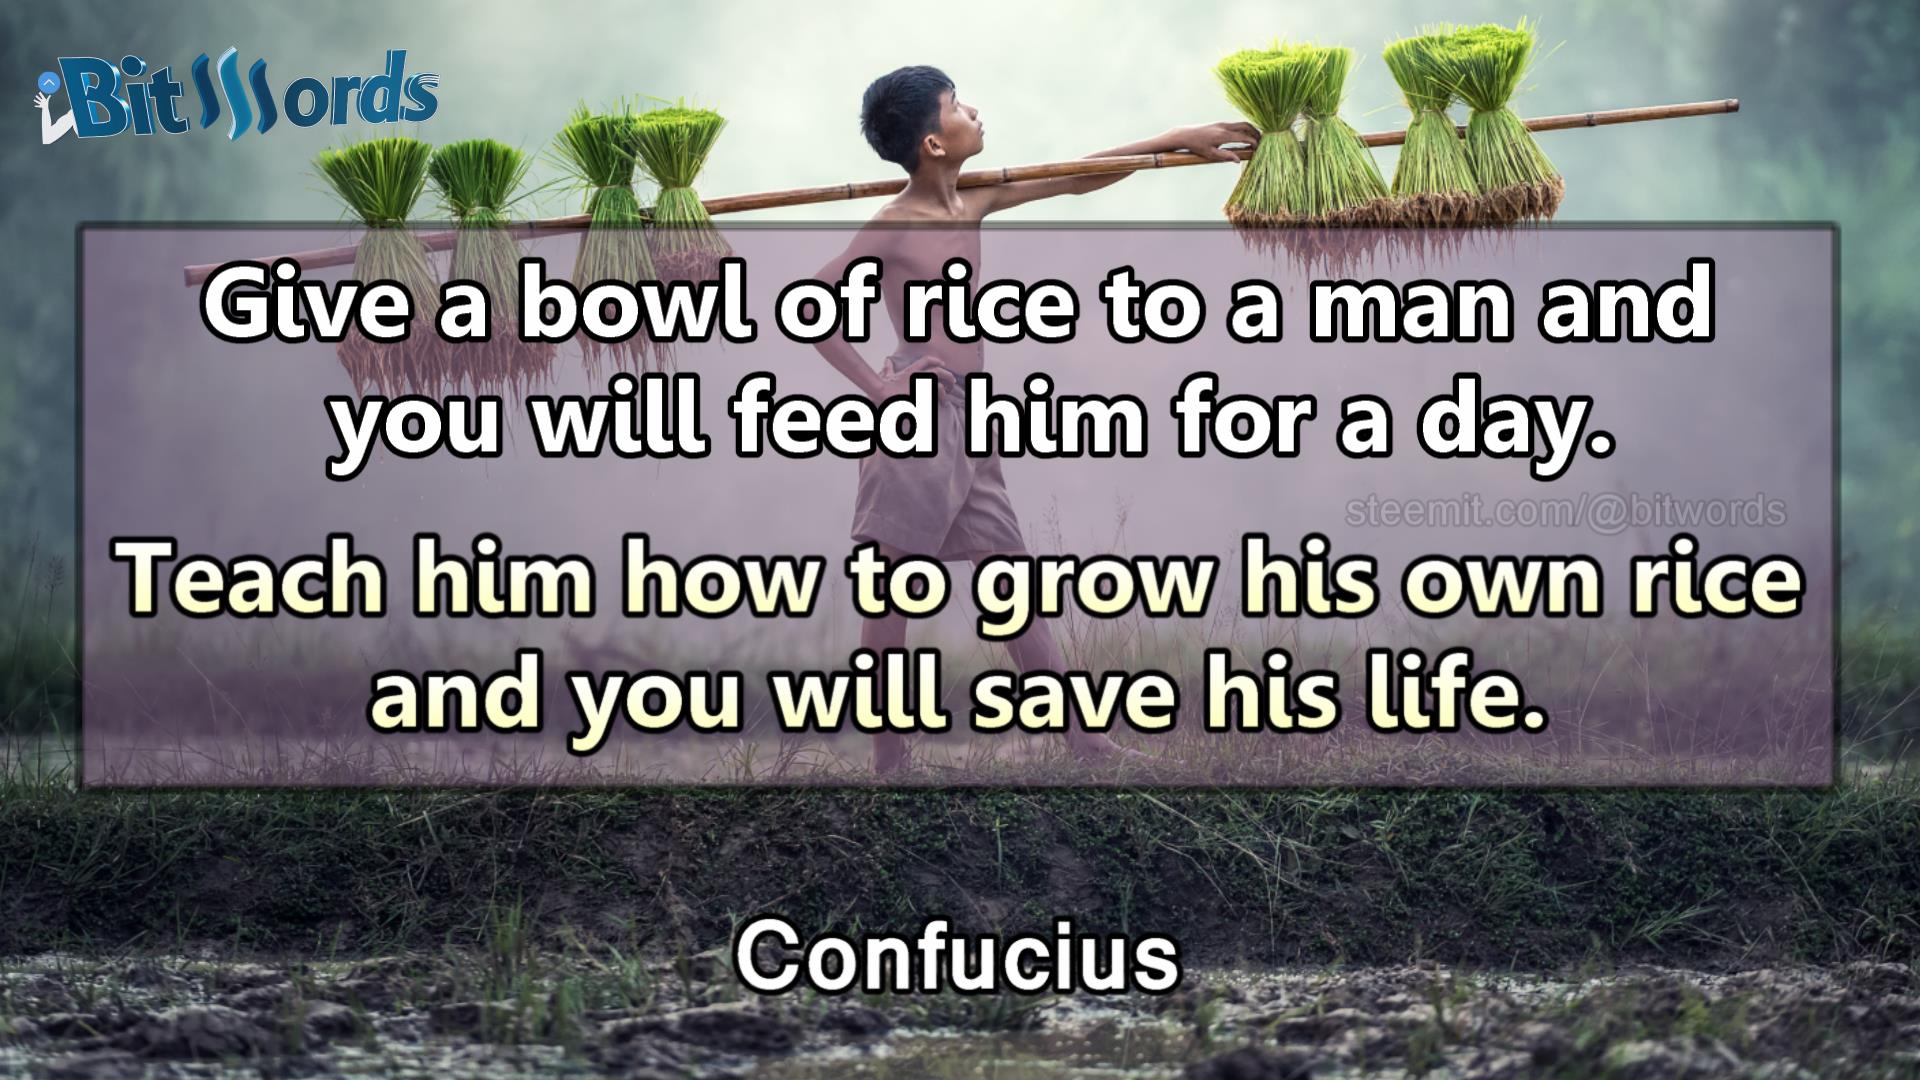 bitwords steemit quote of the day confucious give a bowl of rice to a man and you fill feed him for a da teach him to grow his own rice and you will save his life.jpg